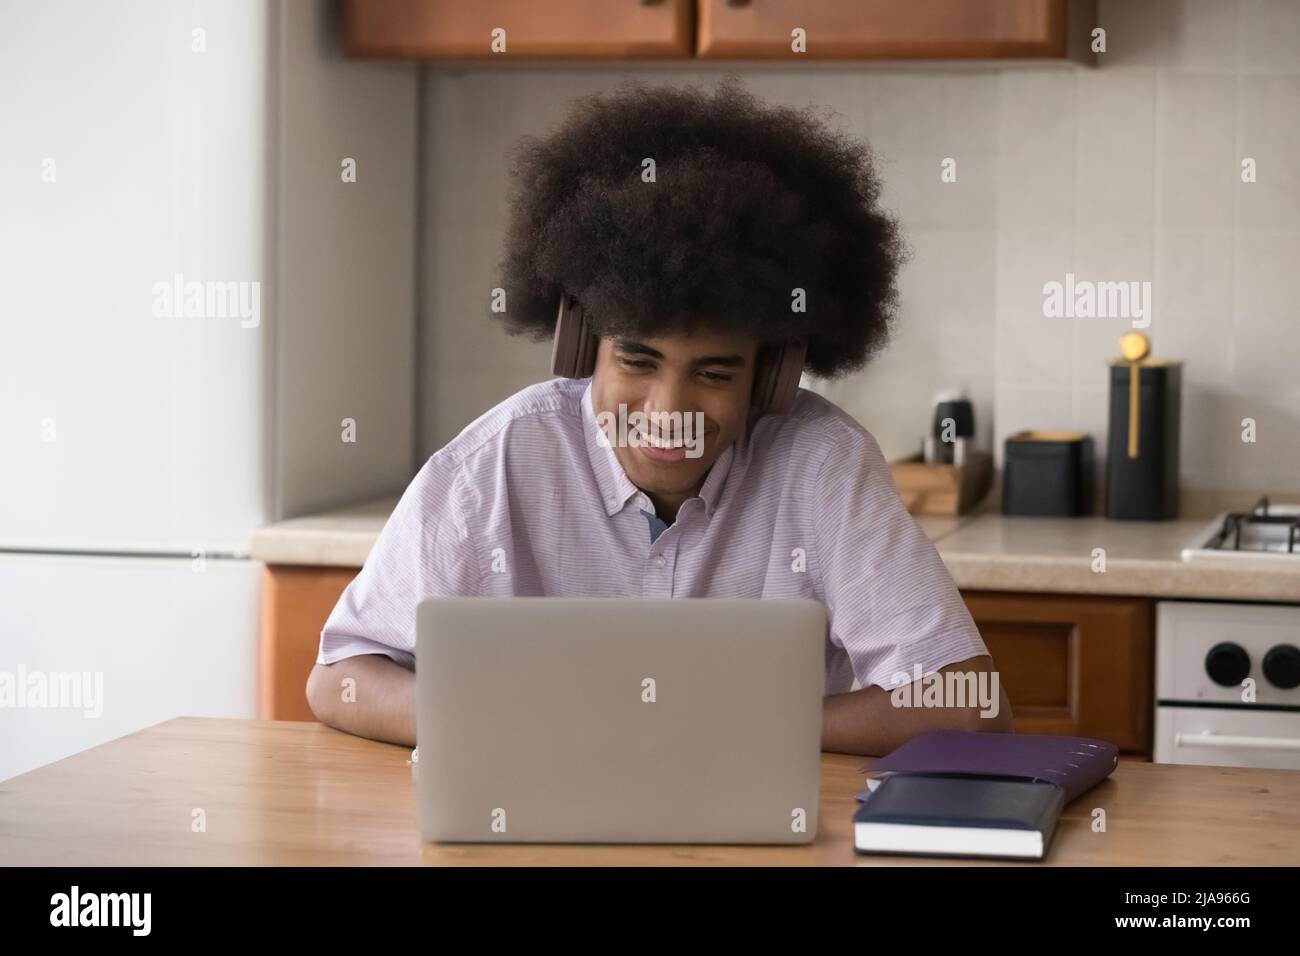 Happy student guy with retro African hairstyle using laptop Stock Photo